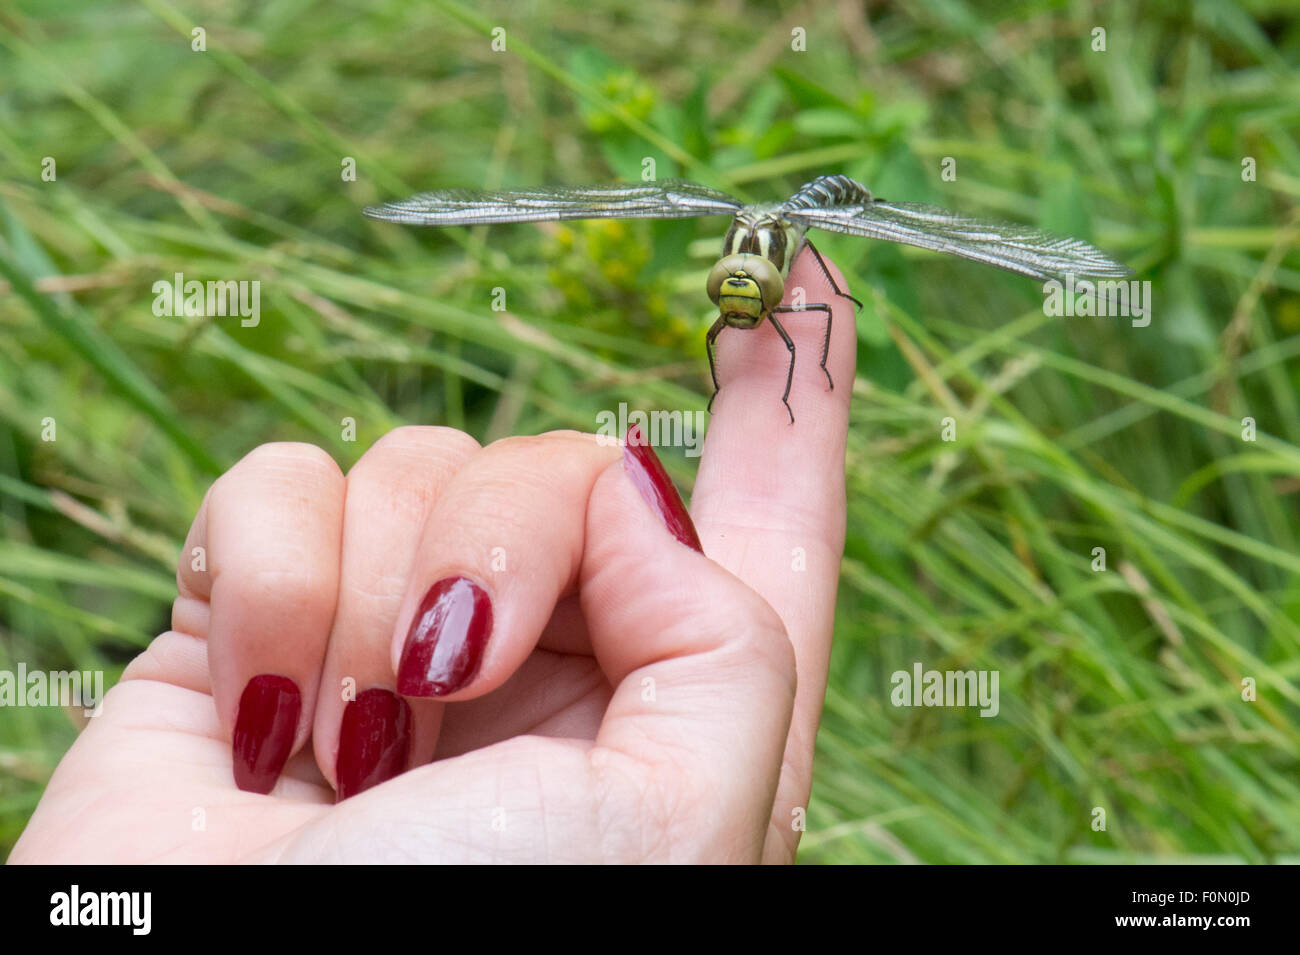 Southern Hawker Dragonfly on finger Stock Photo